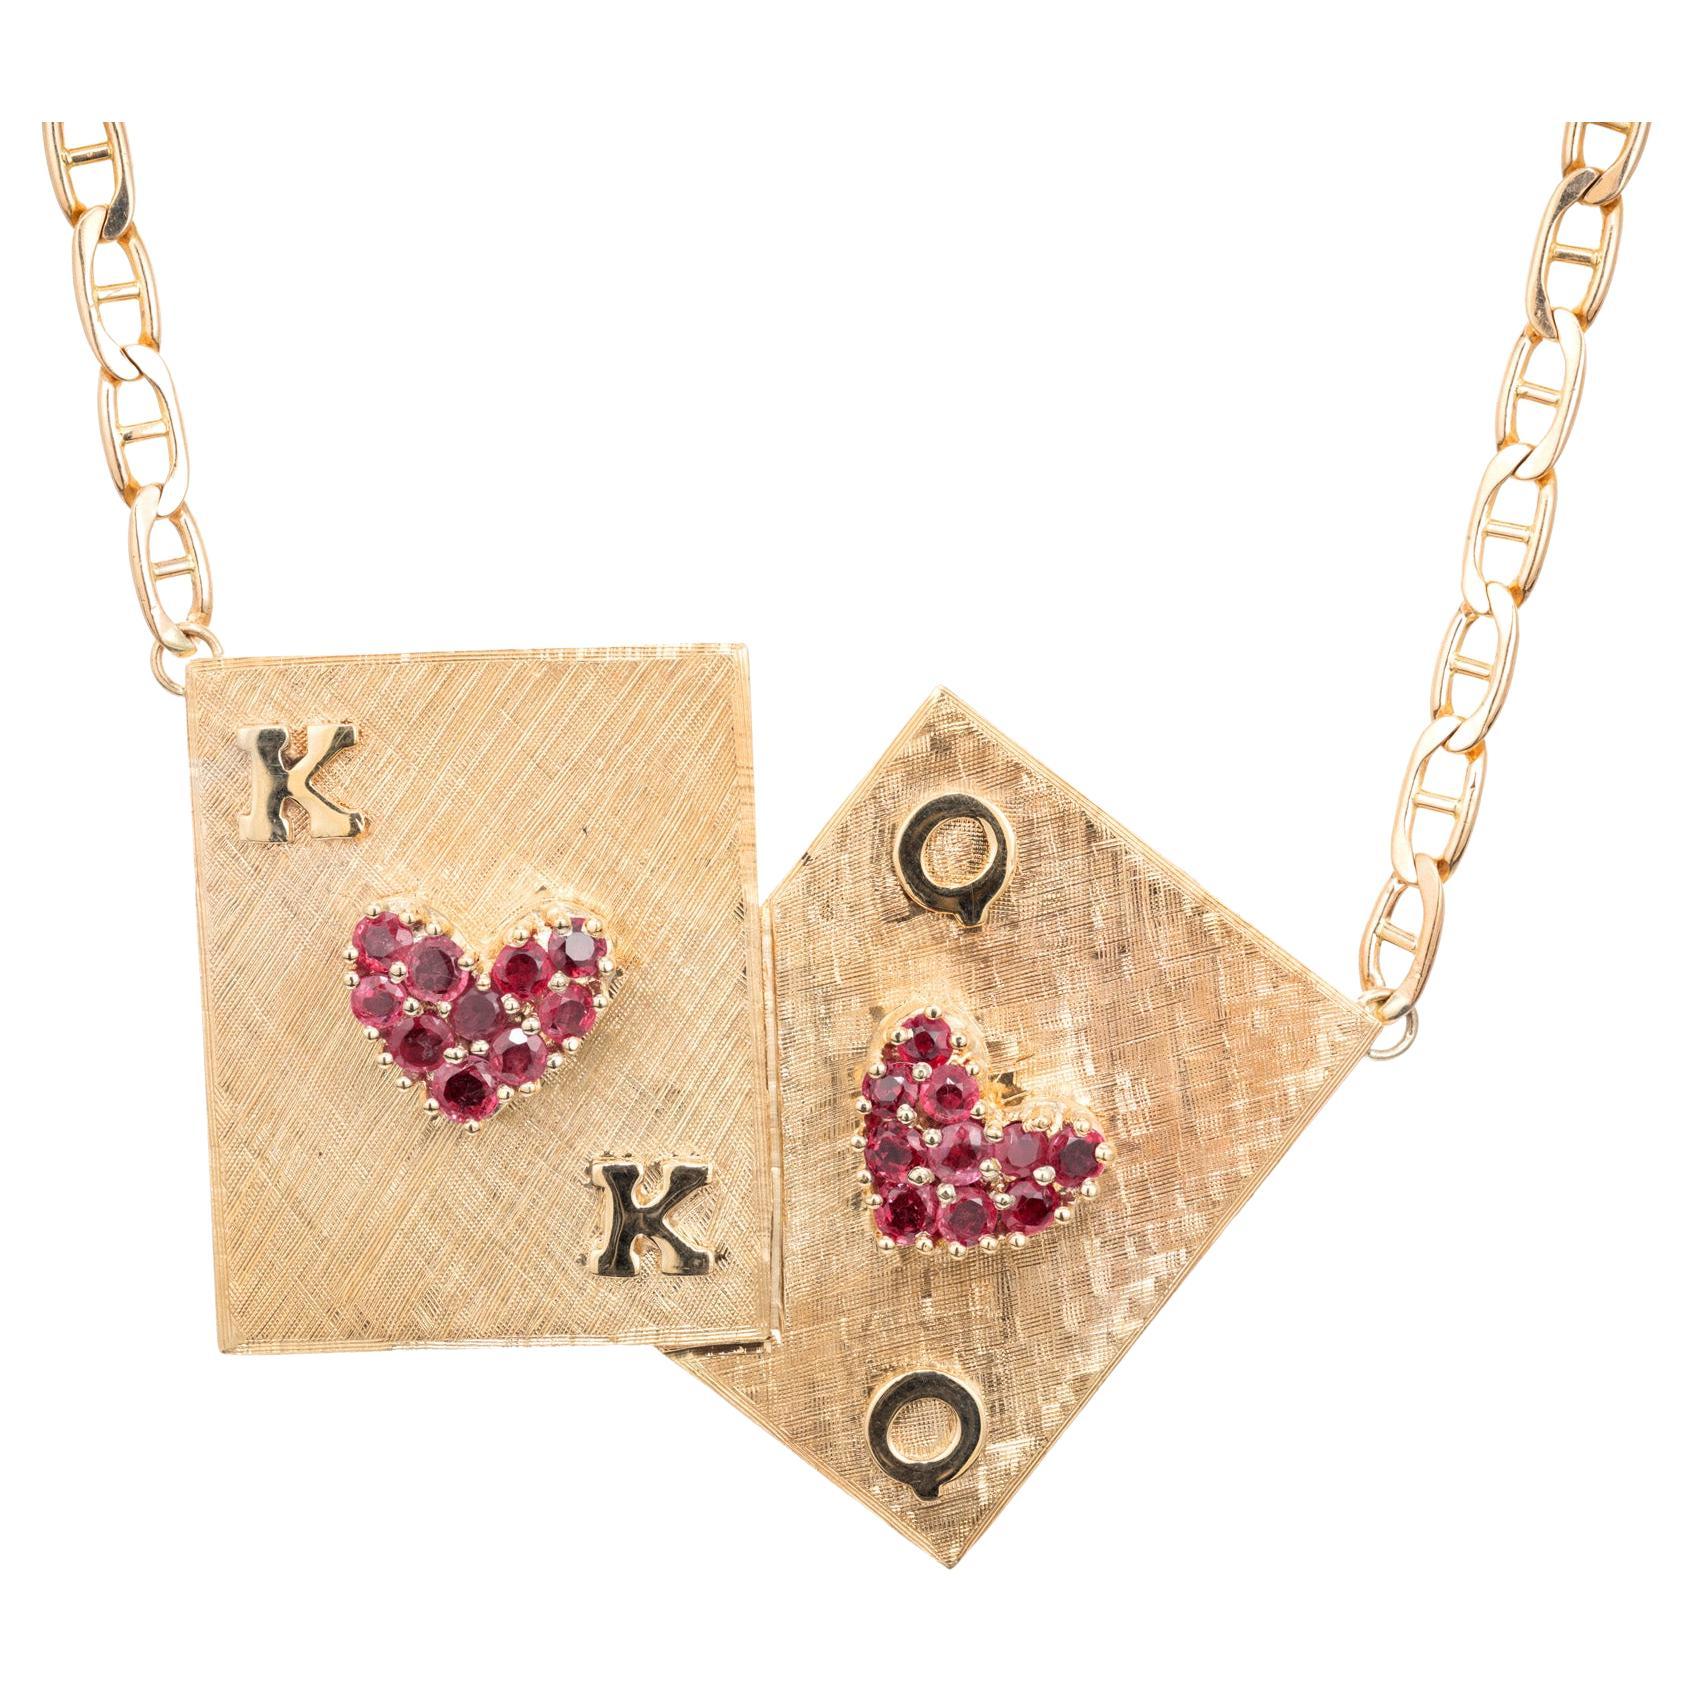 4.00 Carat Ruby Yellow Gold King and Queen of Hearts Poker Card Pendant Necklace